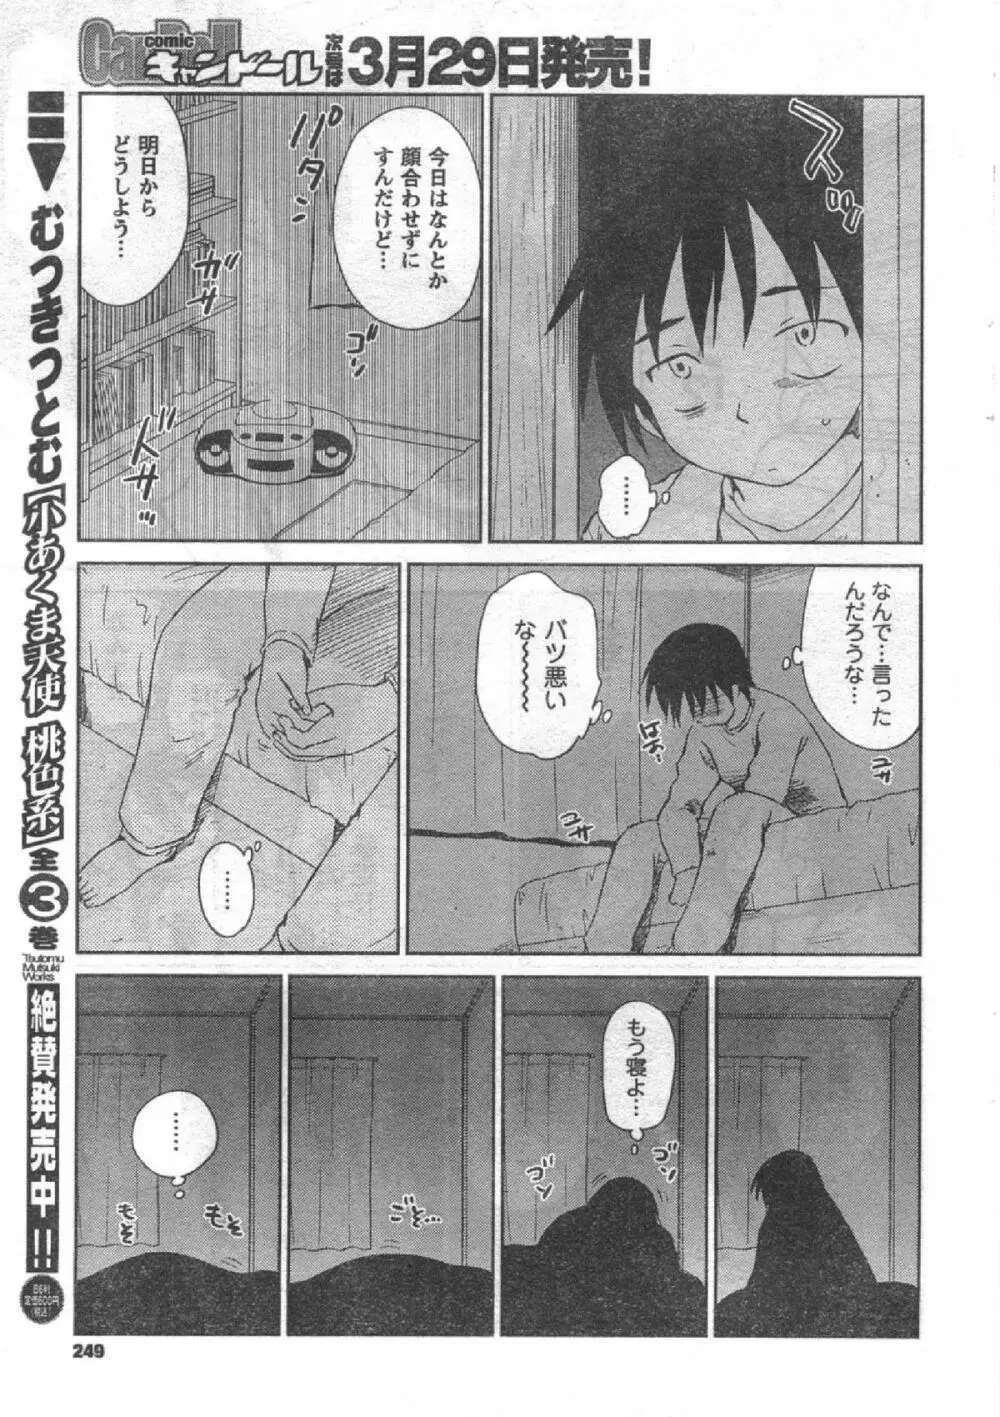 Comic Can Doll Vol 51 Page.248